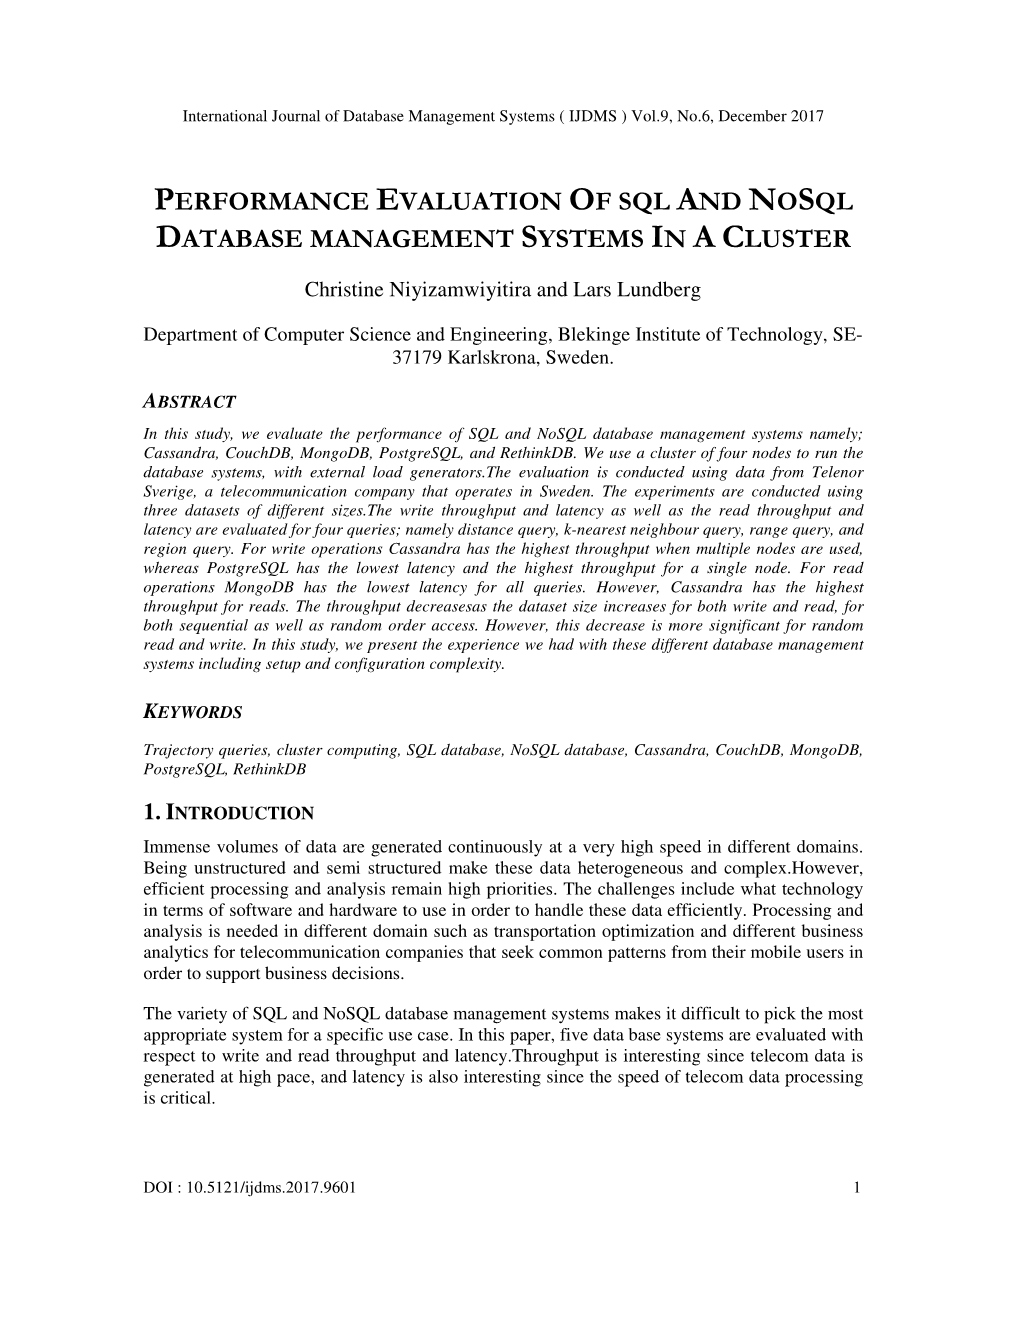 Performance Evaluation of Sql and Nosql Database Management Systems in a Cluster